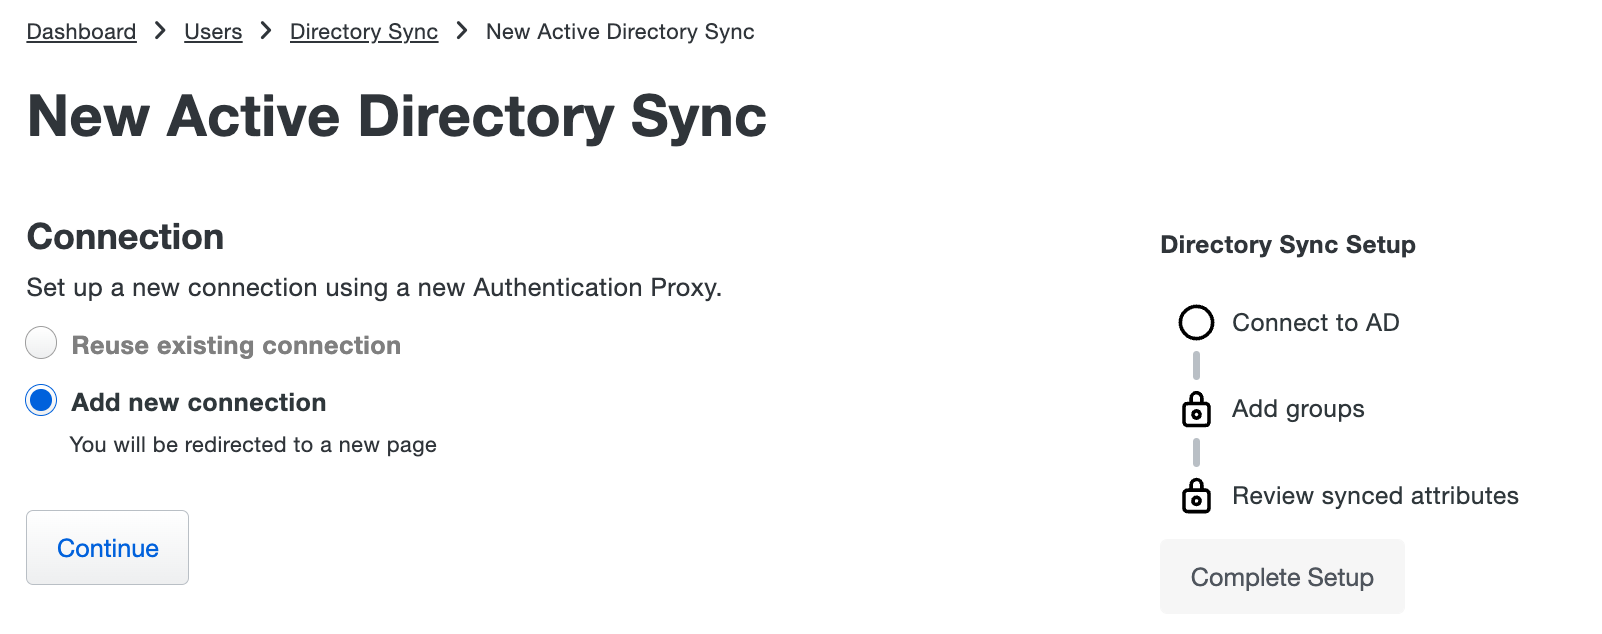 New AD Sync Connection